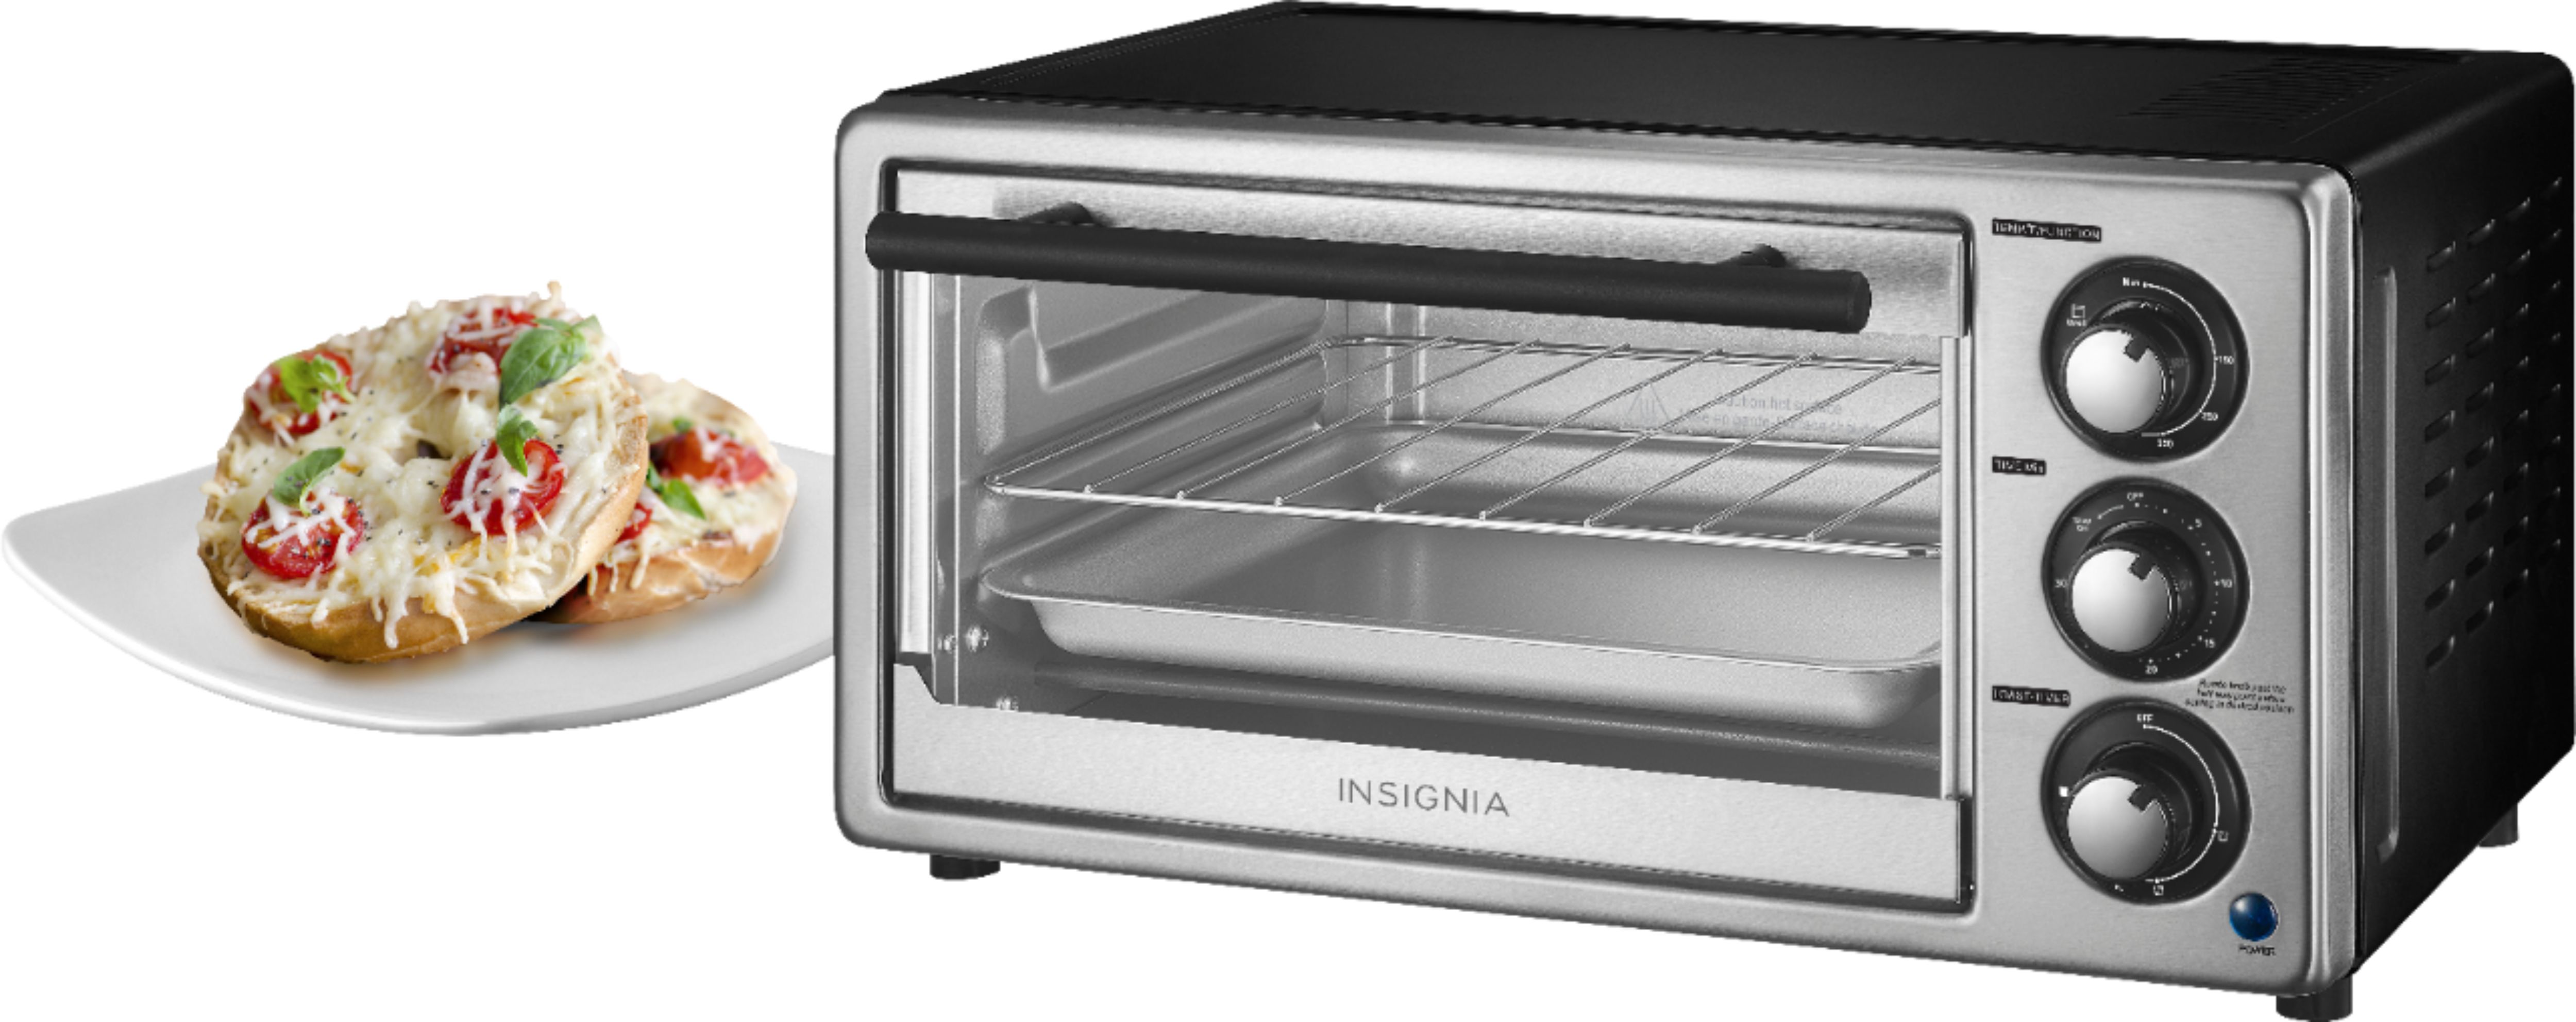 Everything that you need to know about oven toaster grill – Agaro